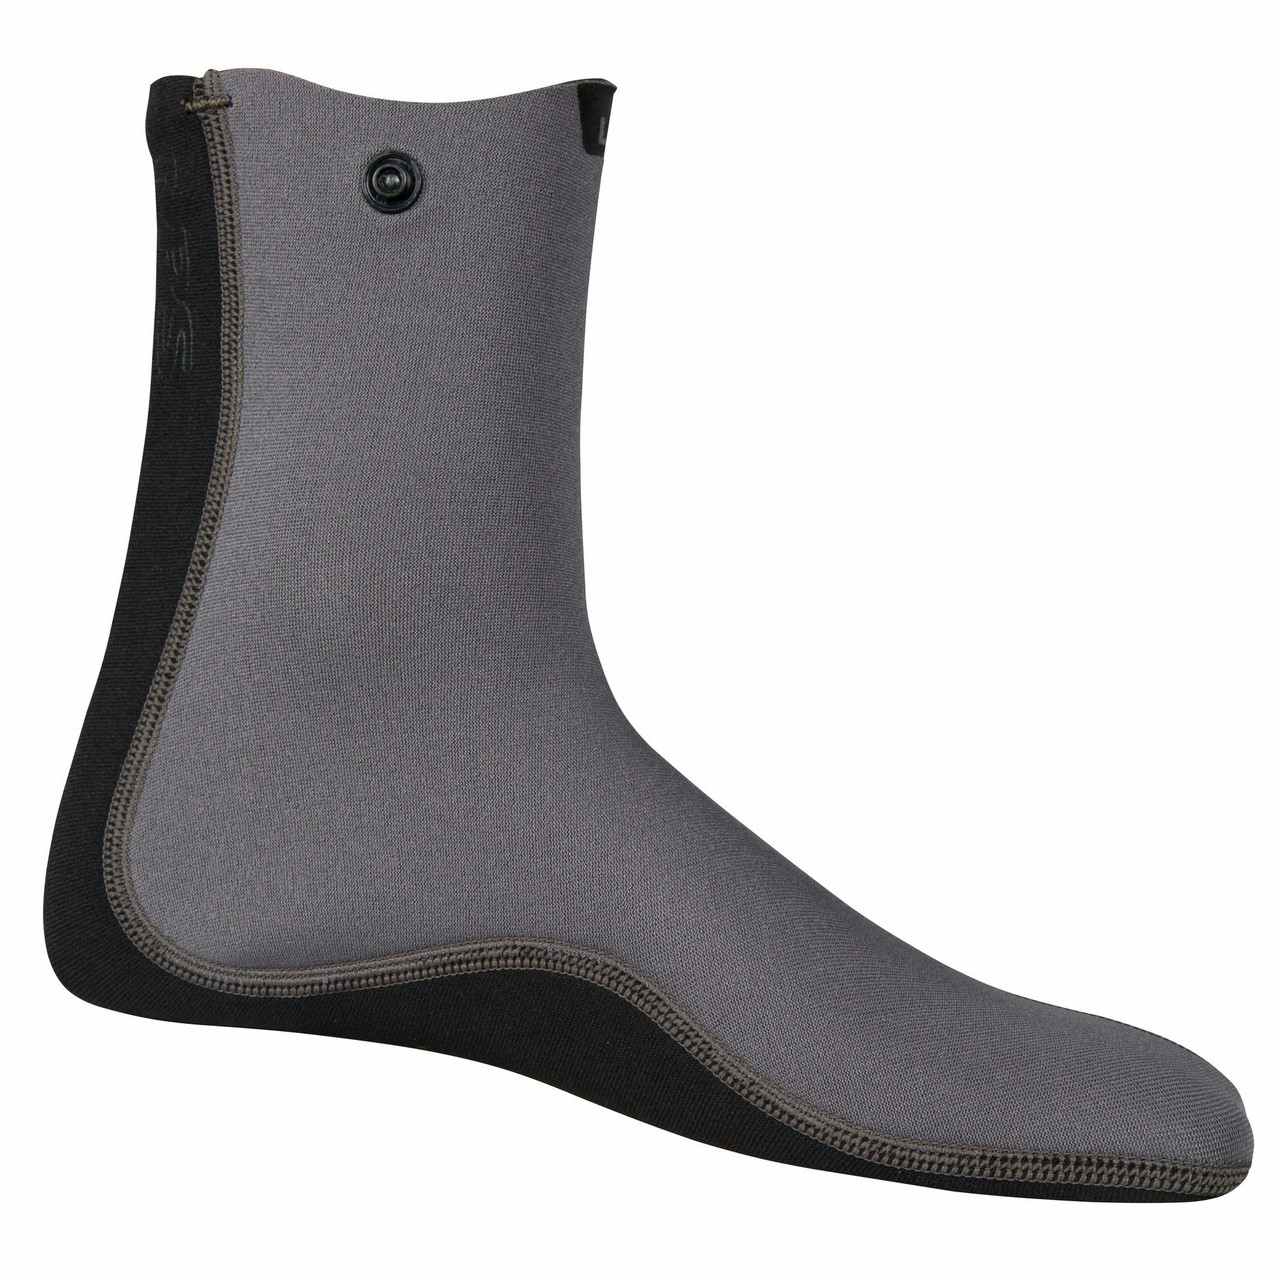 Chaussettes Wetsocks Gris